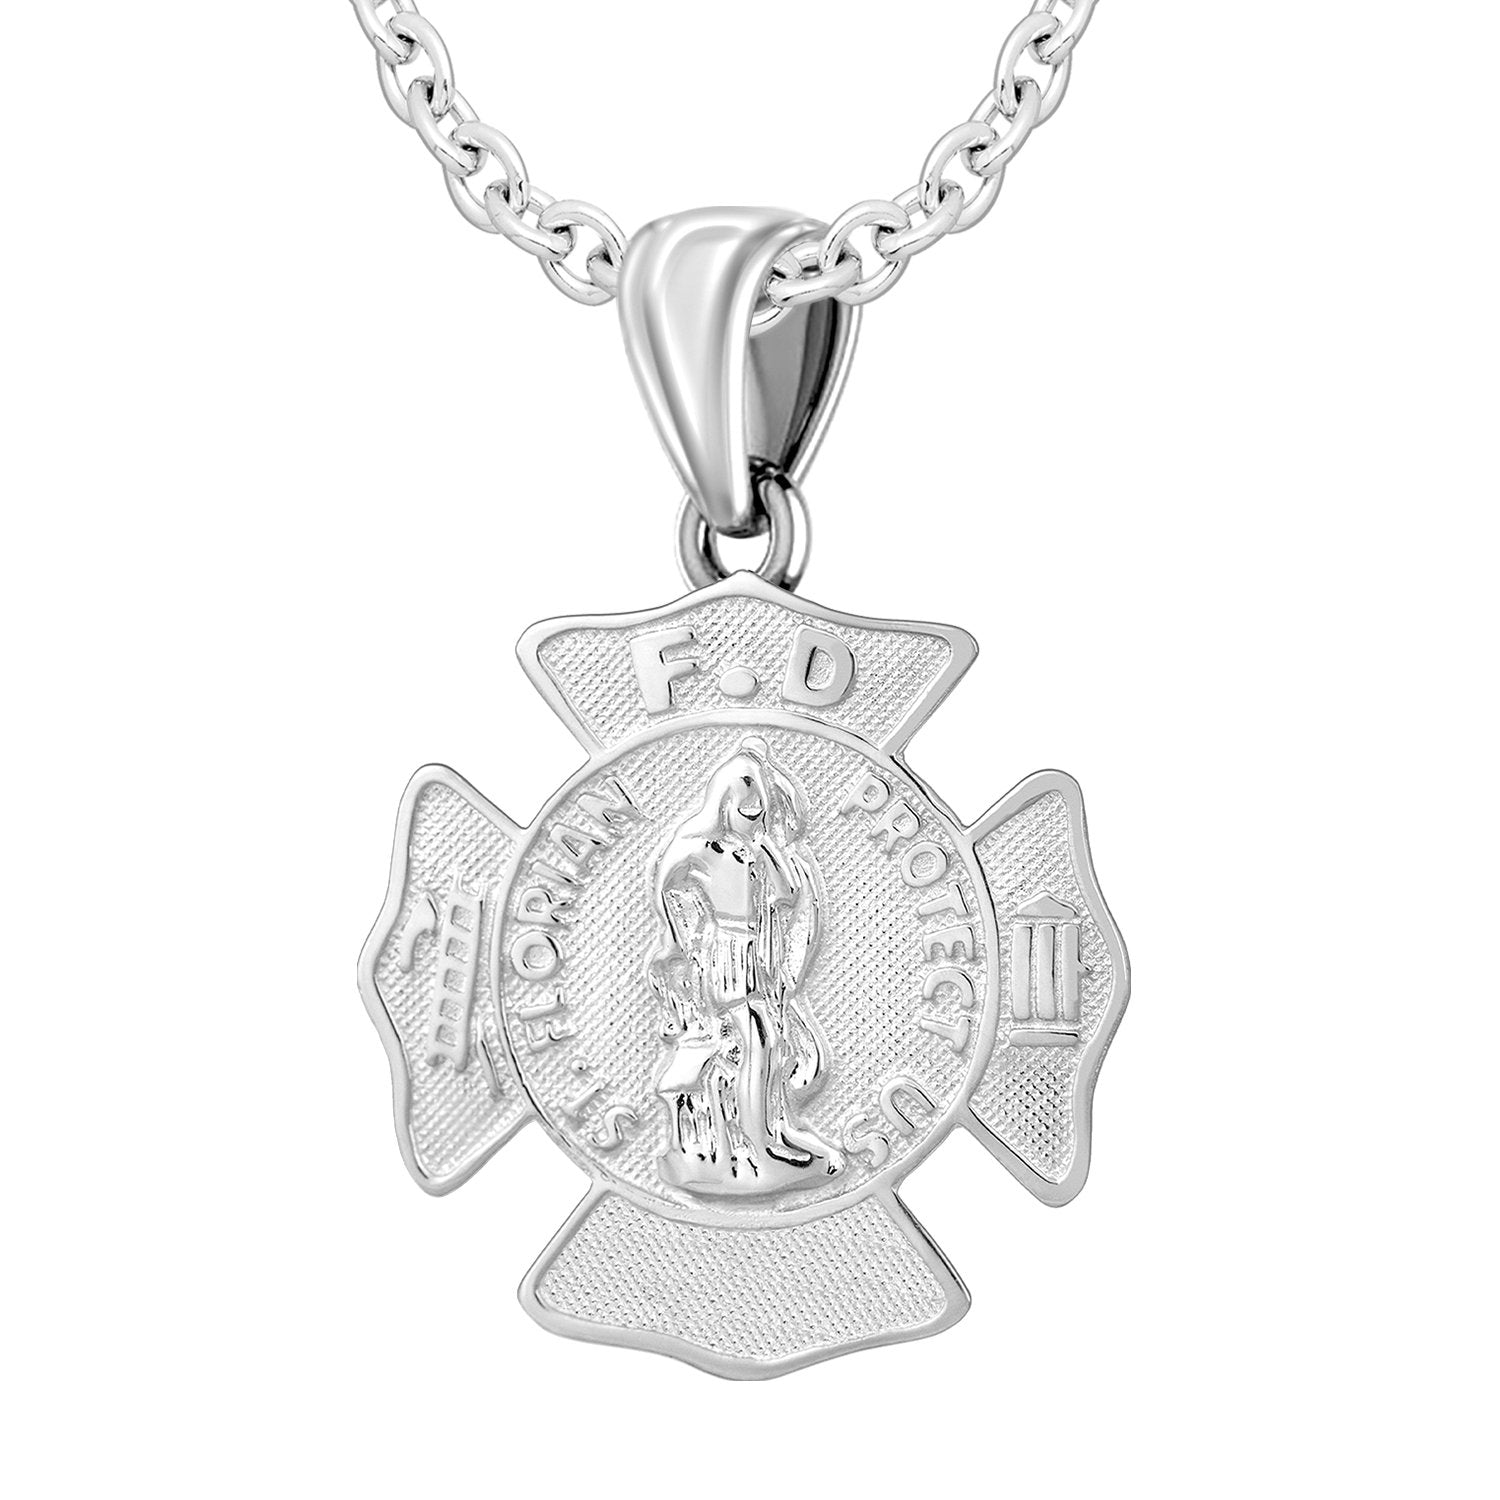 Firefighter Pendant In 925 Silver - 2.5mm Cable Chain